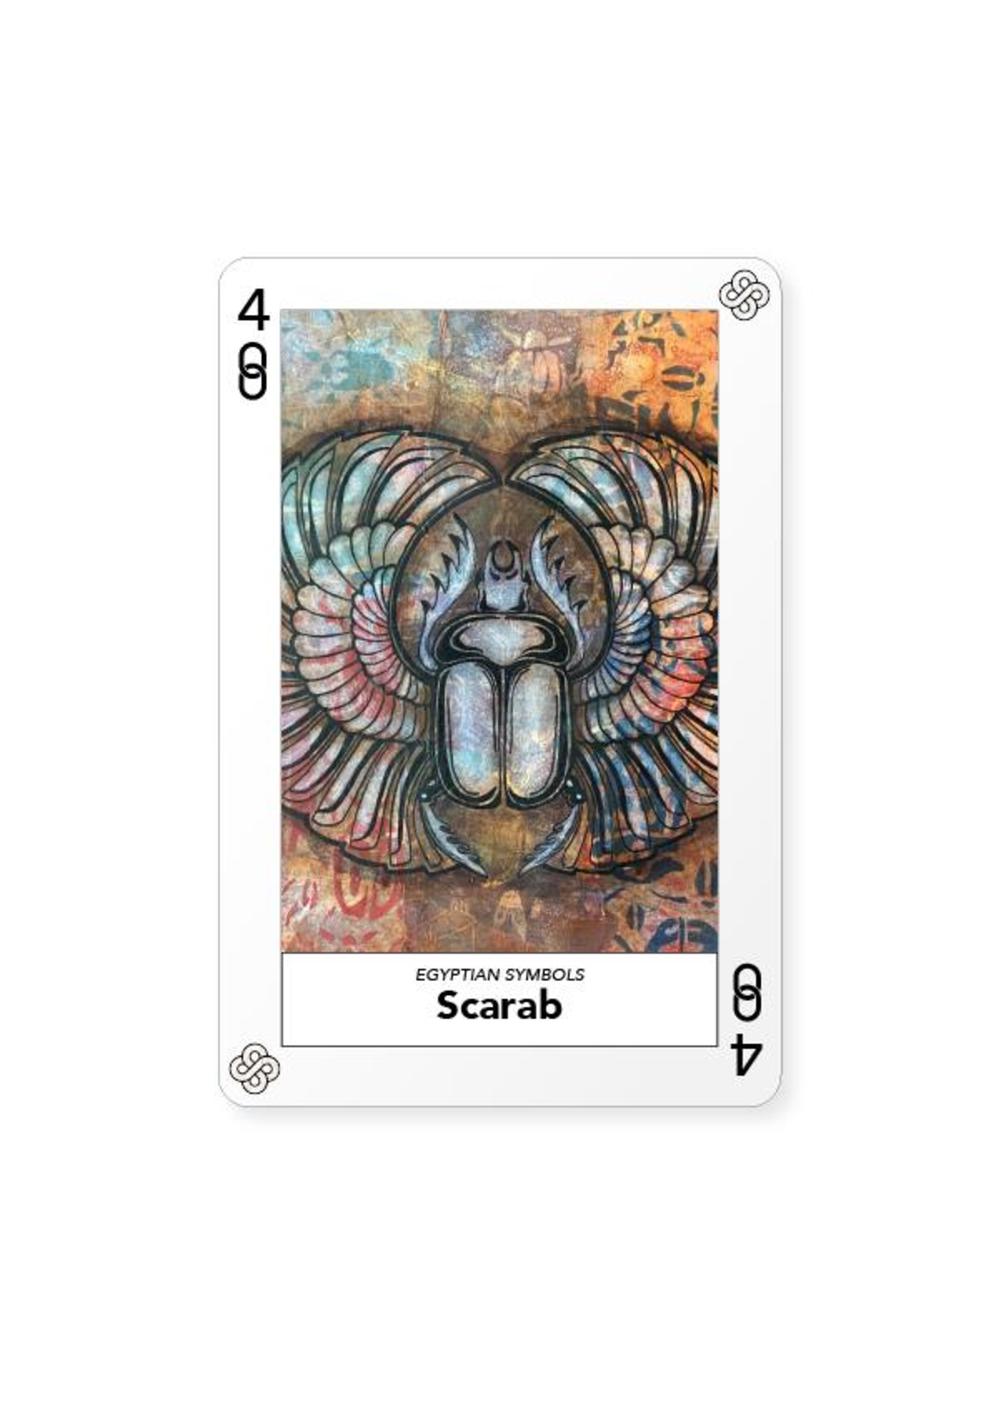 Certificate of Authenticity and Consignment - Scarab